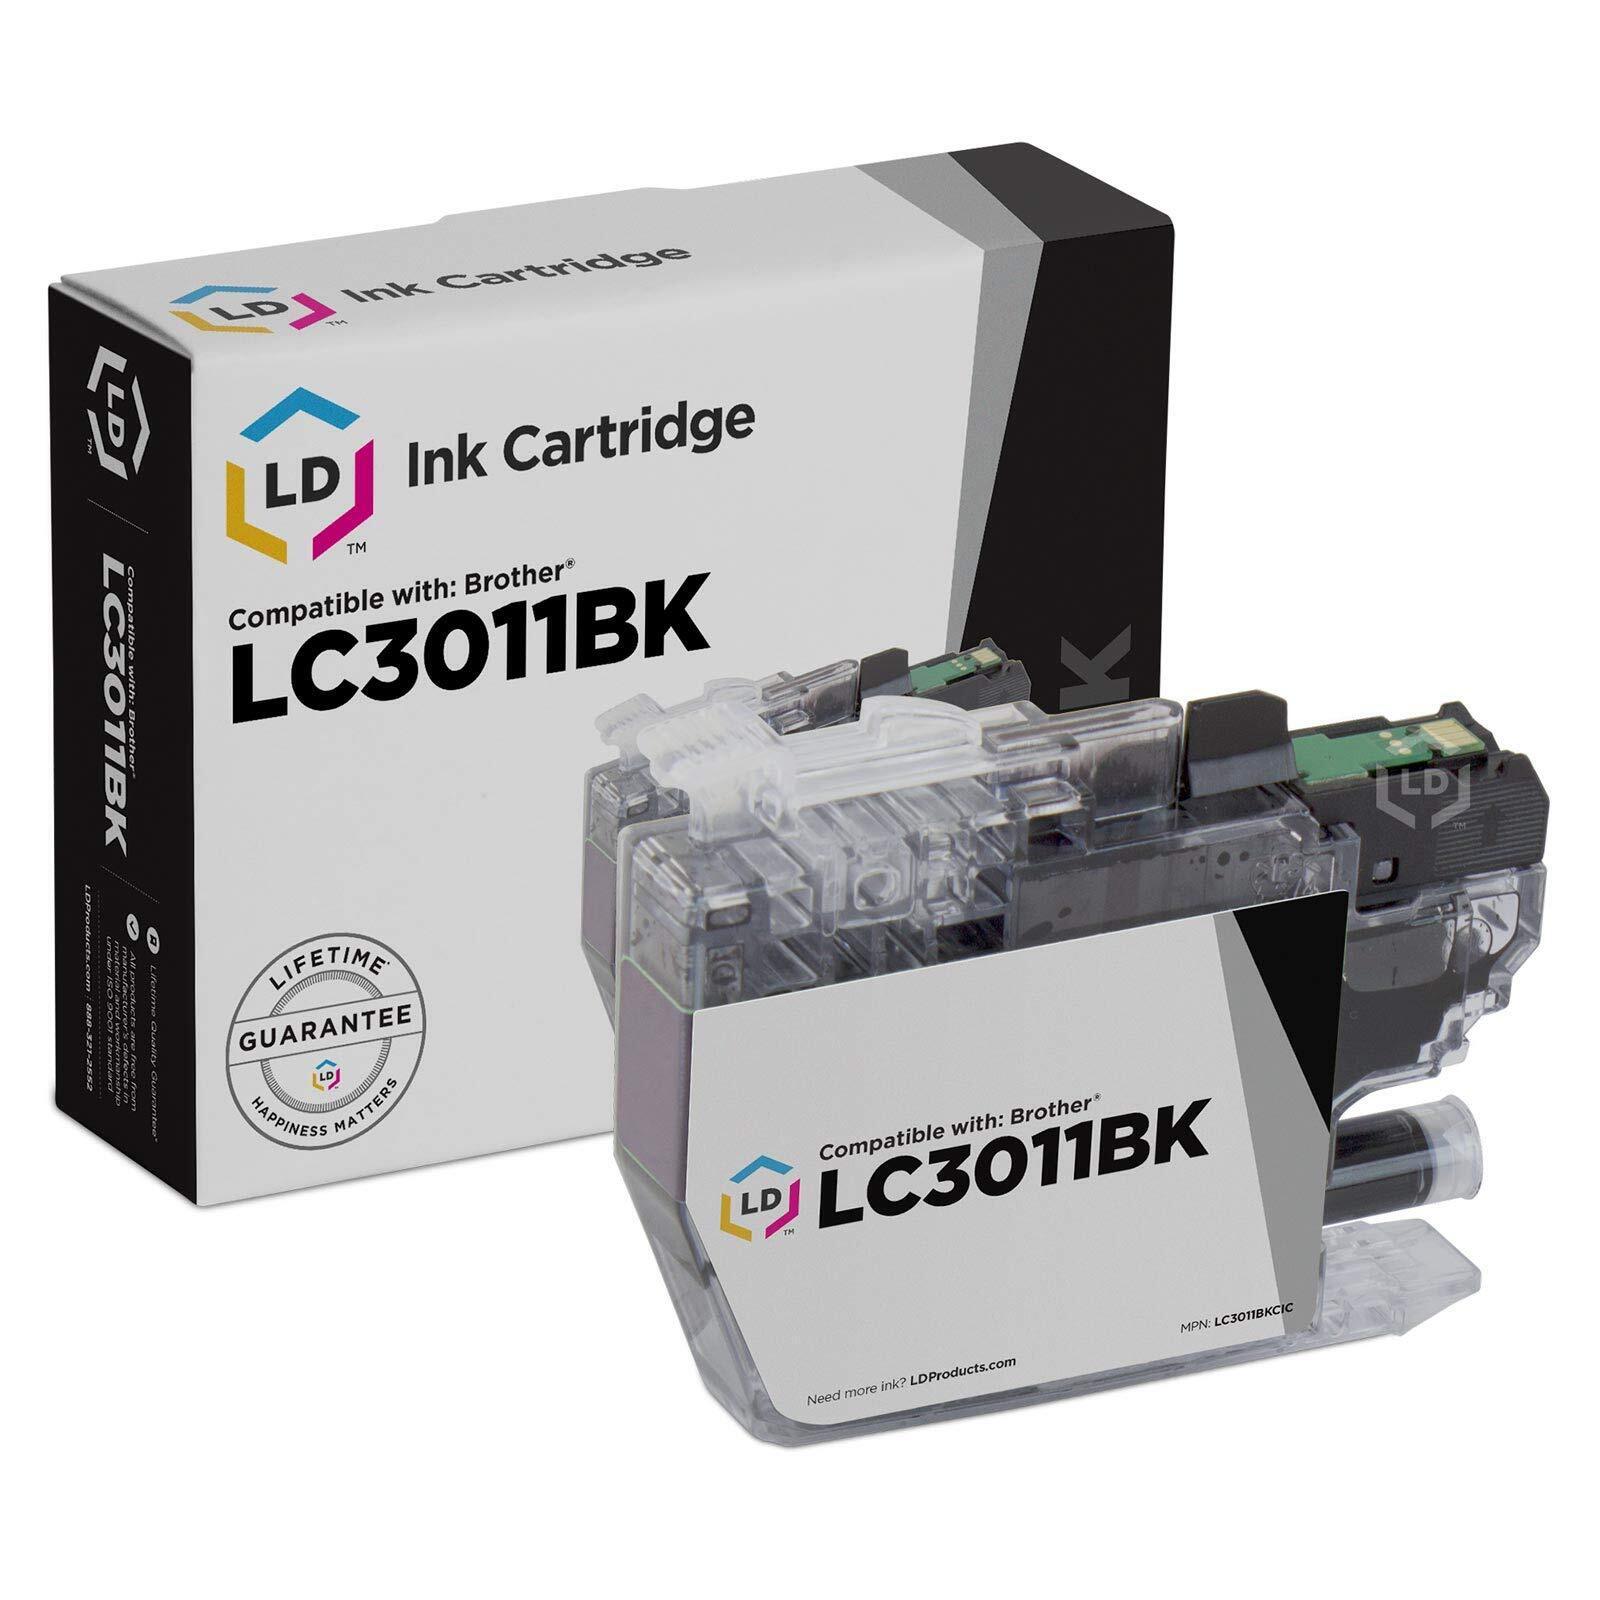 LD Compatible Replacement for Brother LC3011 / LC3011BK Black Ink Cartridge